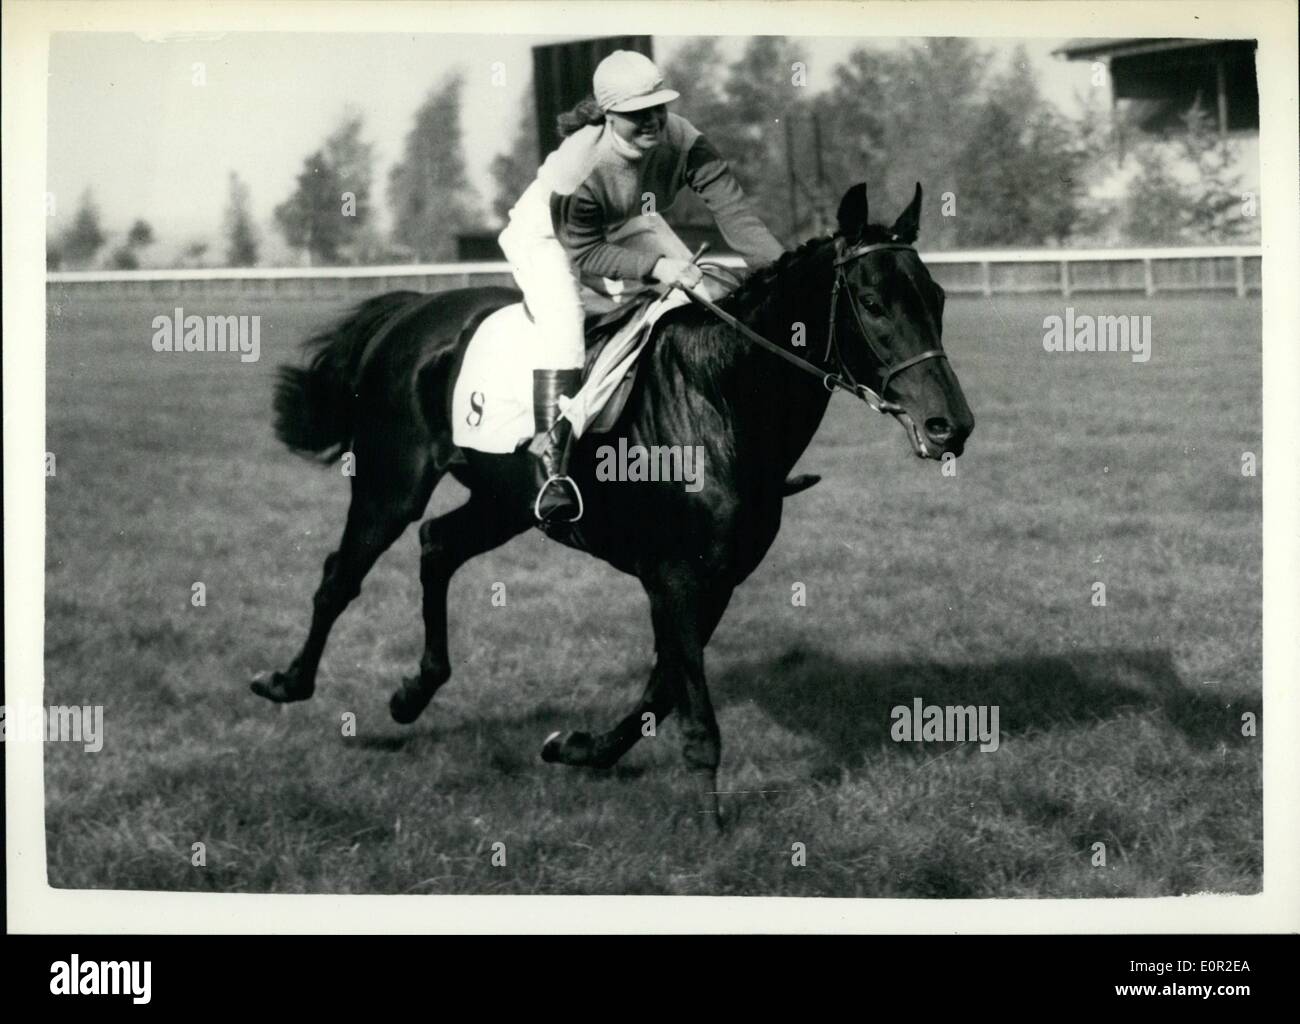 Oct. 10, 1957 - 10.10.57 14&frac12; year old girl wins the Newmarket Town Plate. The Newmarket Town Plate, the only race in which a woman can become jockeys took place today. Keystone Photo Shows: 14-year old Miss Scarlett Rimell, daughter of trainer Fred Rimell, seen winning the race on Hippocampe , at Newmarket today, She was the youngest competitor. Stock Photo